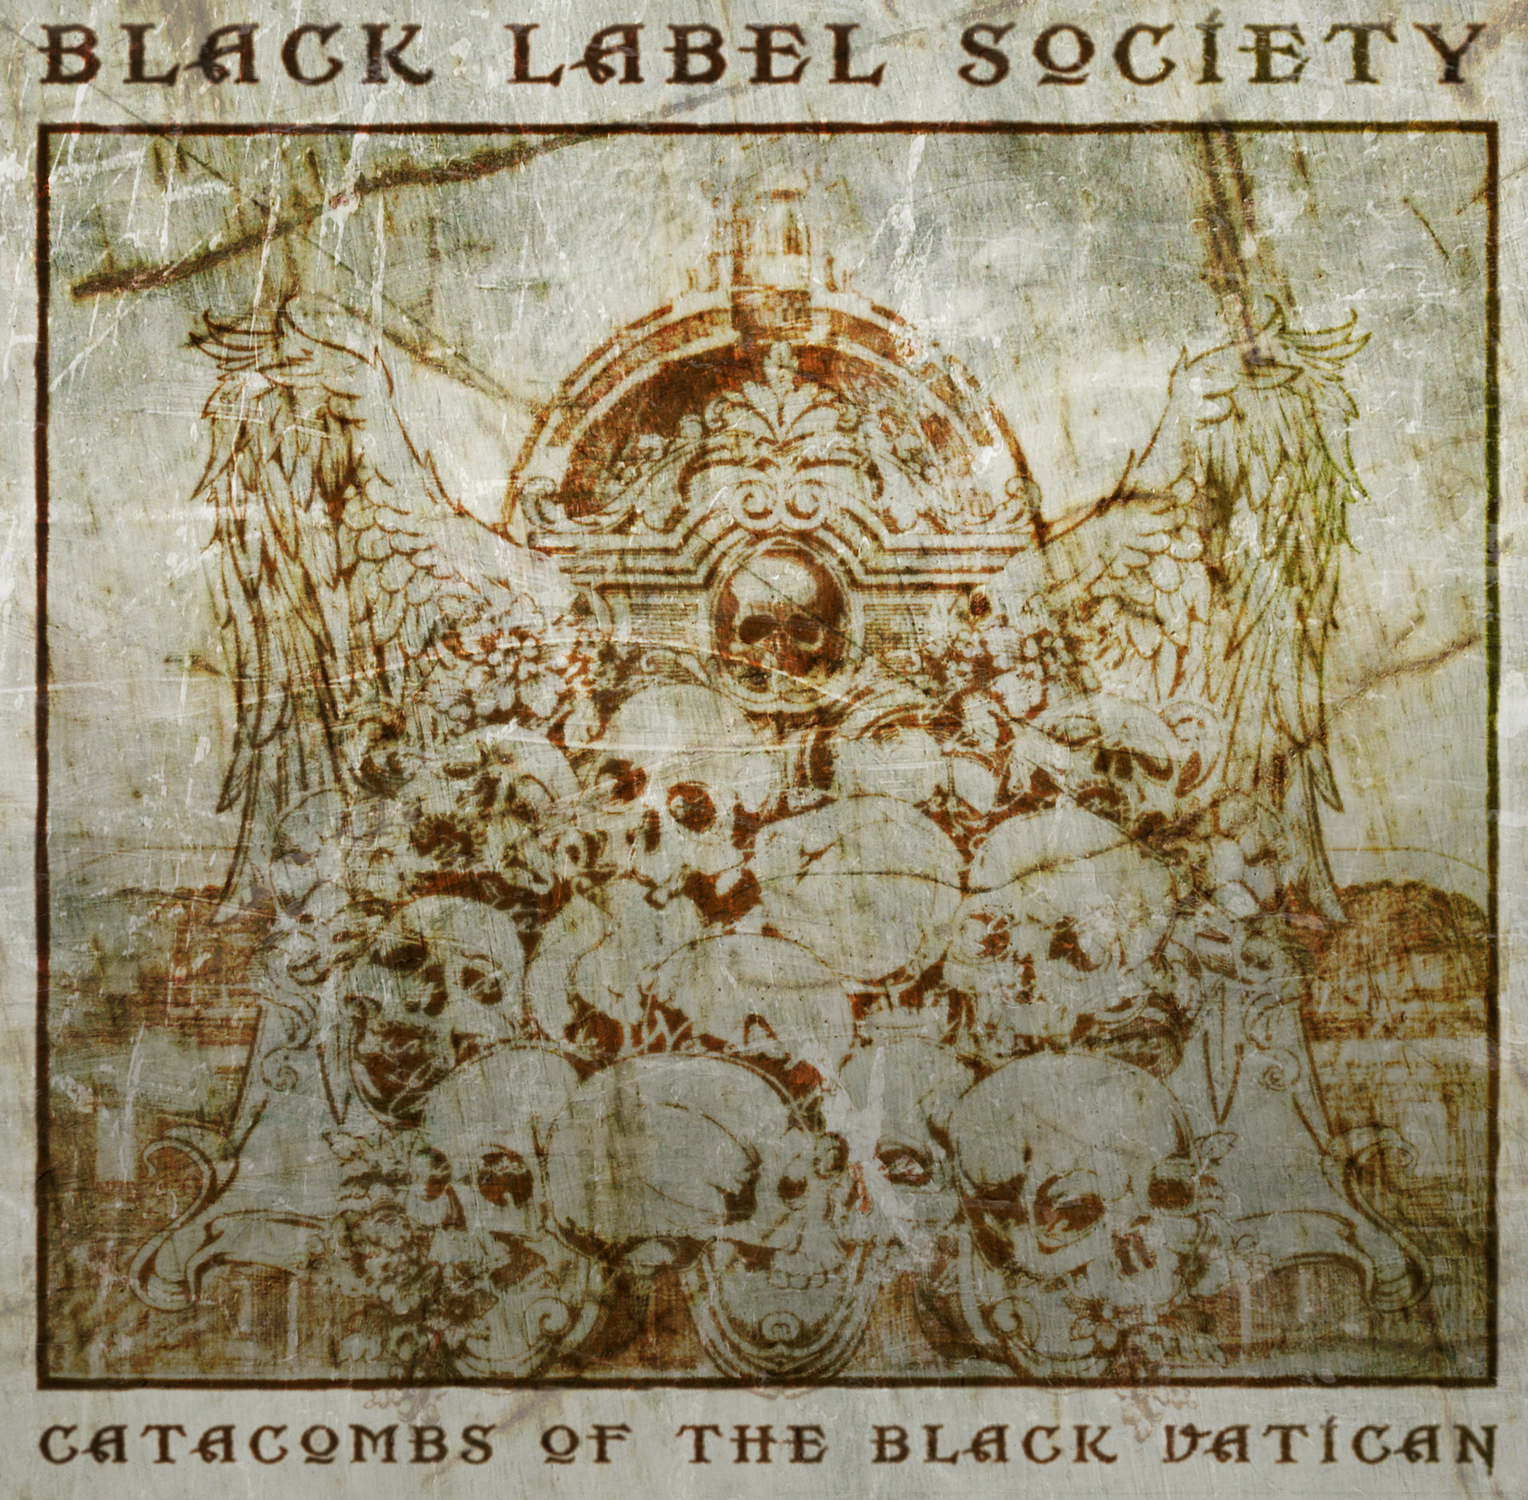 Black Label Society Cd Cover - Black Label Society Catacombs Of The Black Vatican , HD Wallpaper & Backgrounds